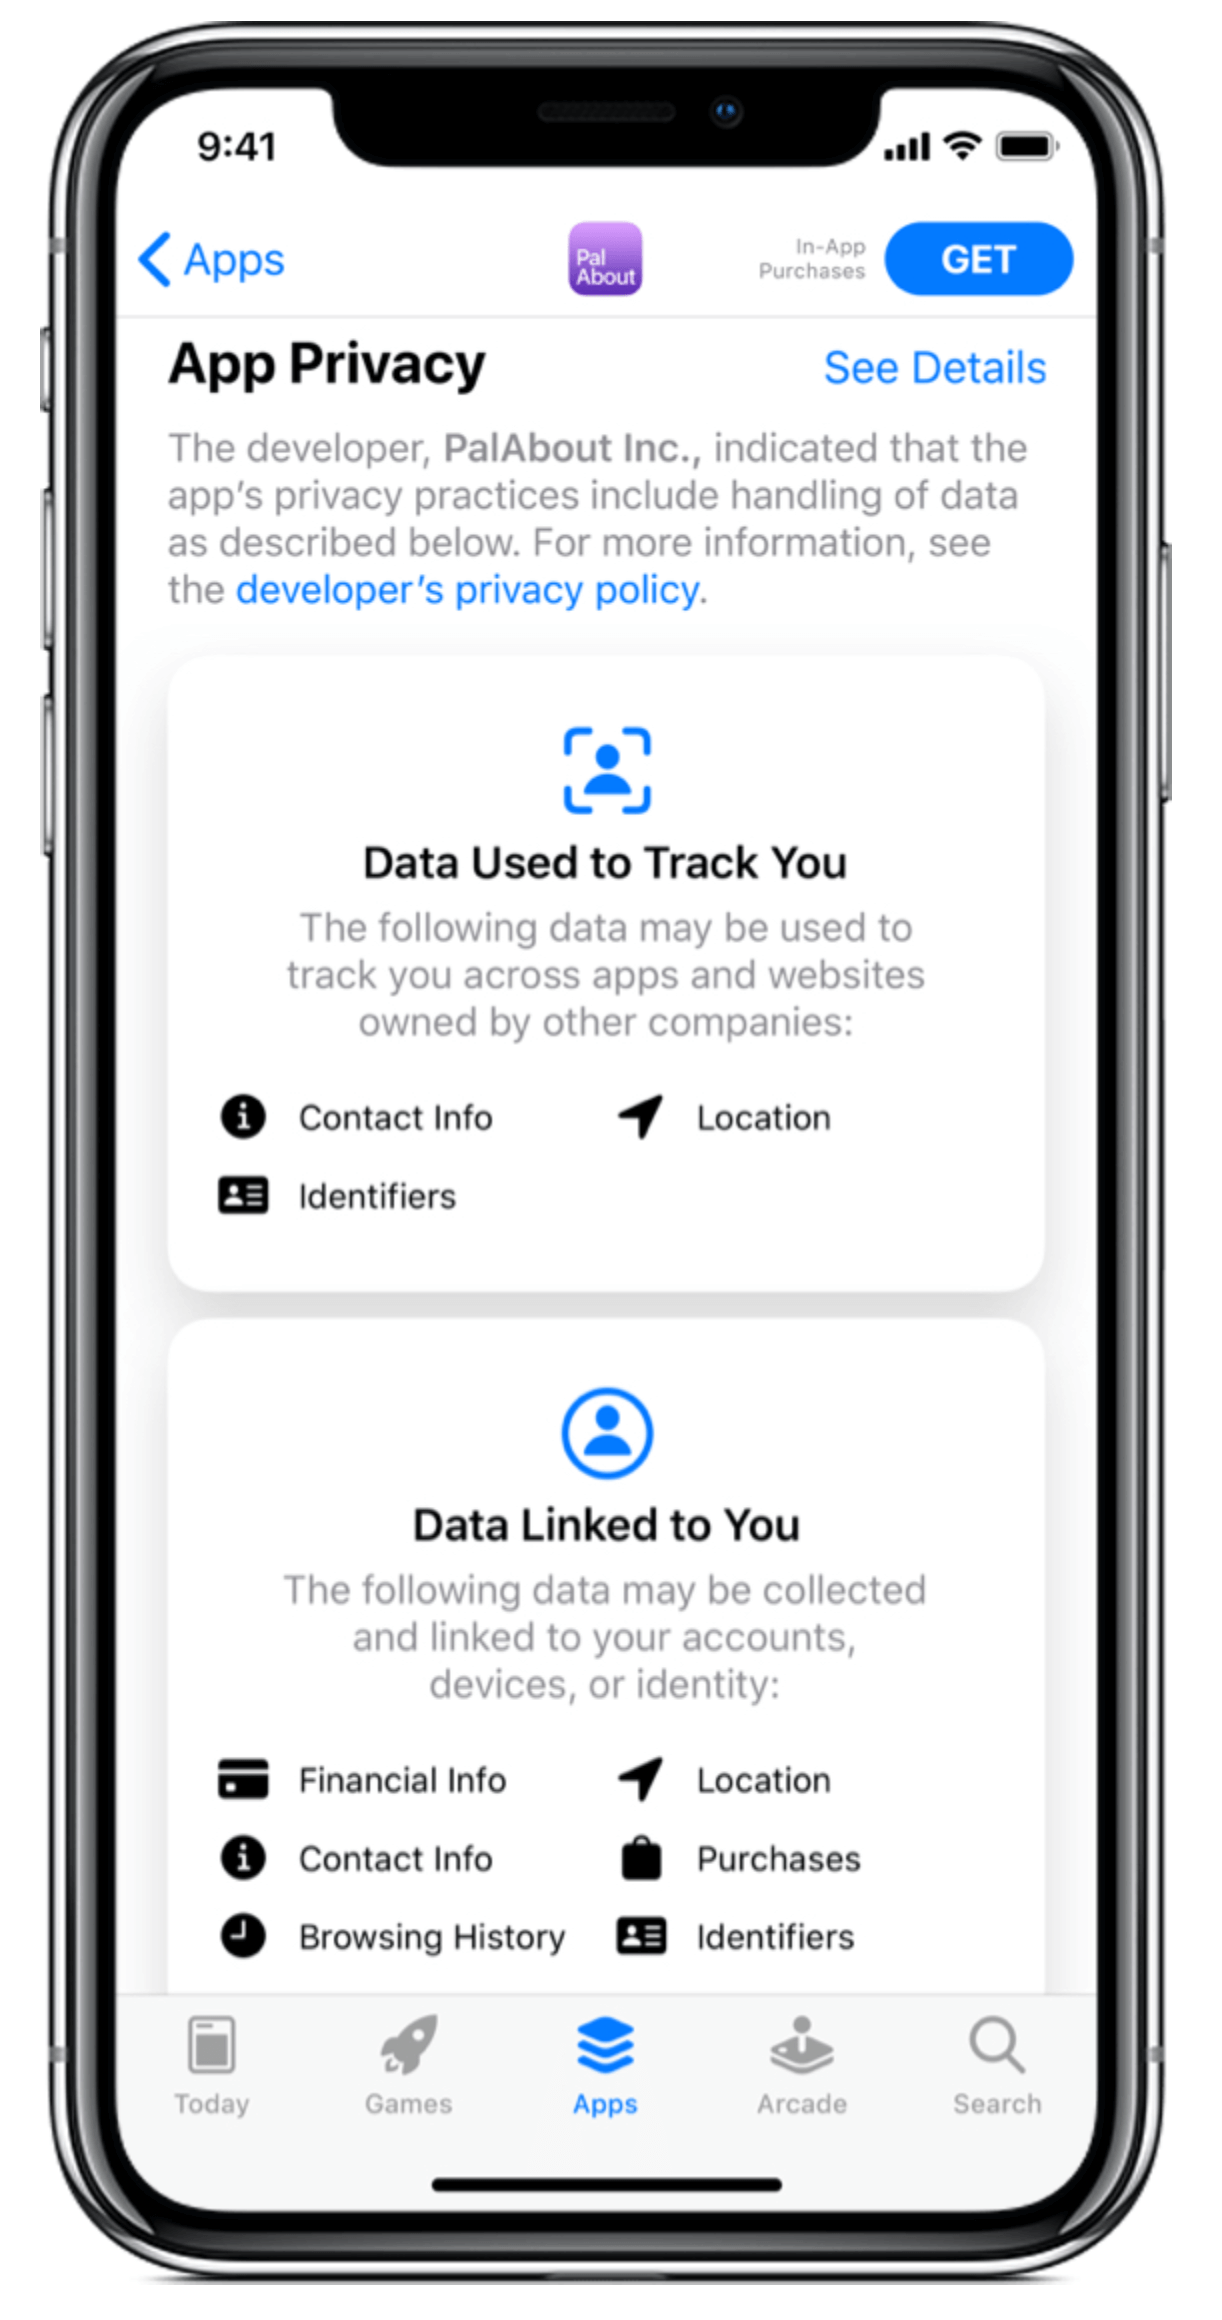 A screenshot of an iPhone app’s details page in the App Store displaying information about the kinds of data that app will use to track and link the user across other companies’ apps and websites